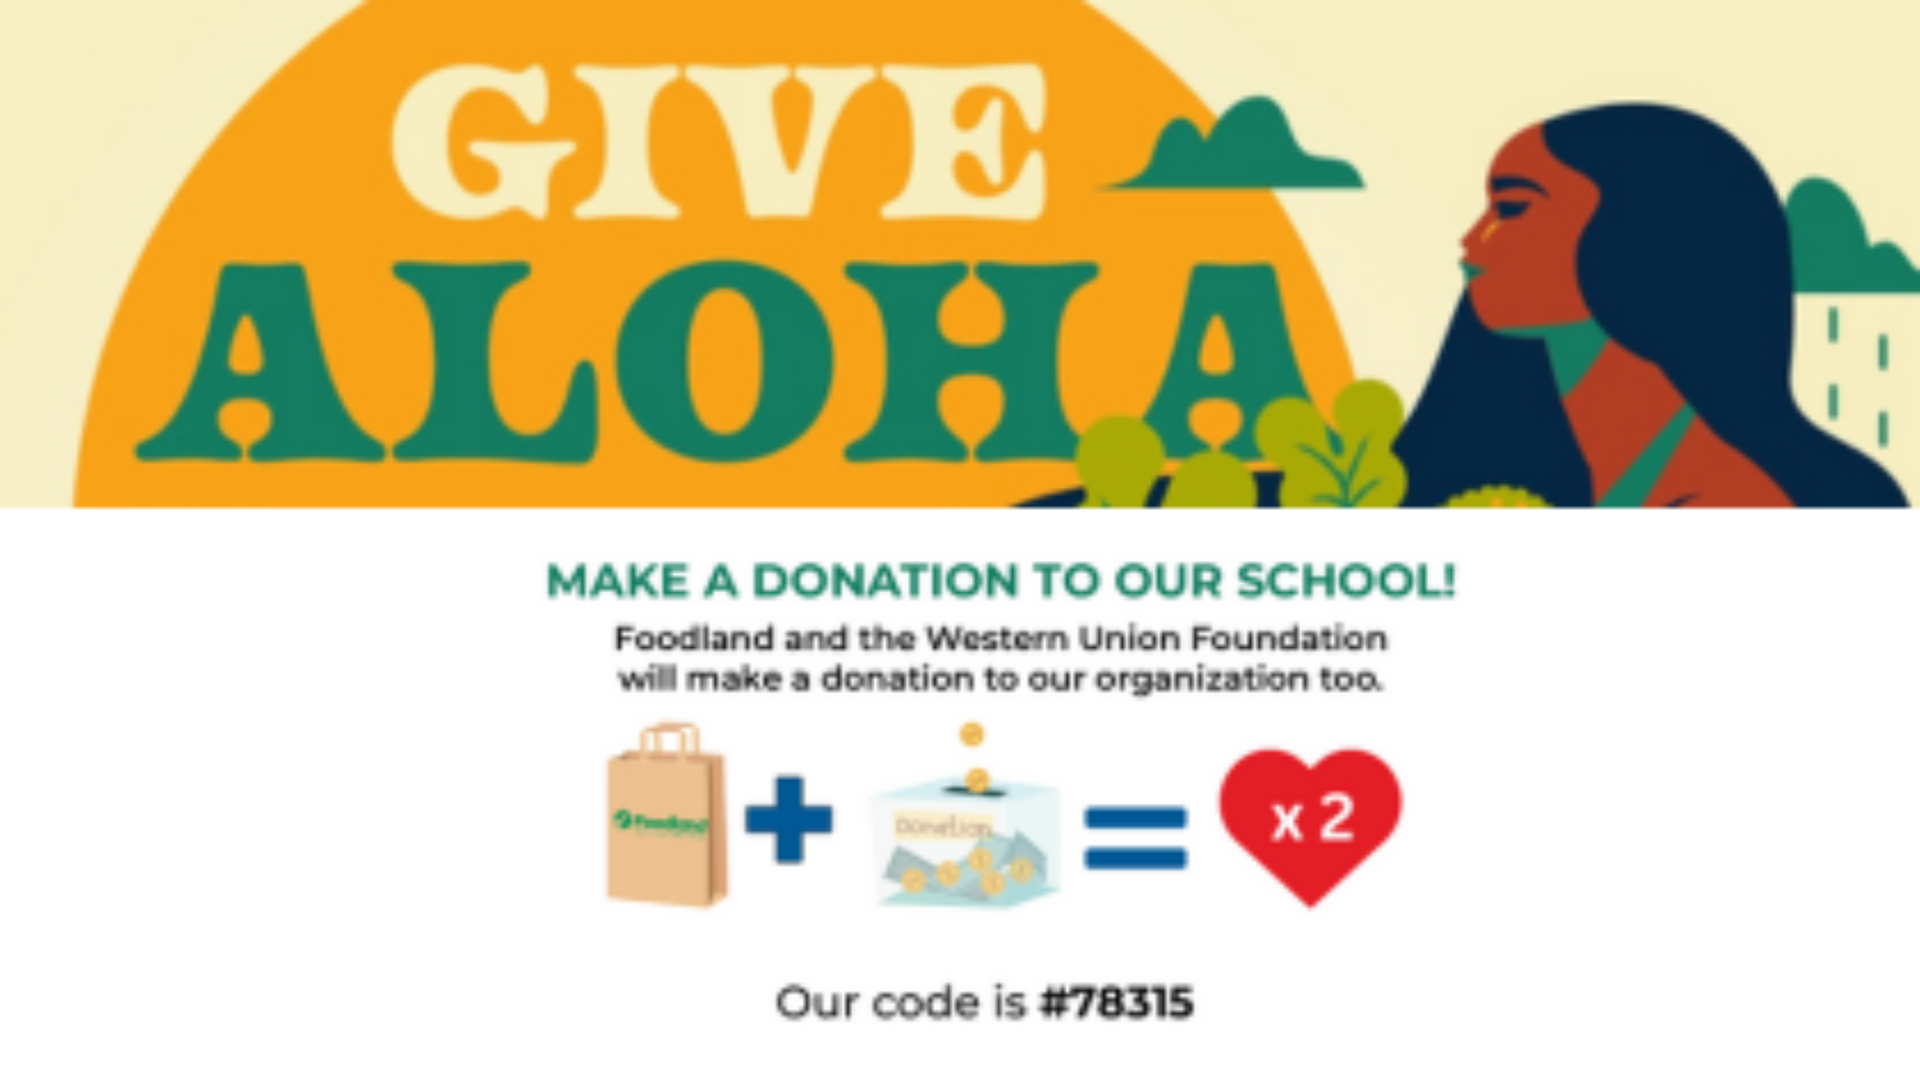 Make a donation to our school! 